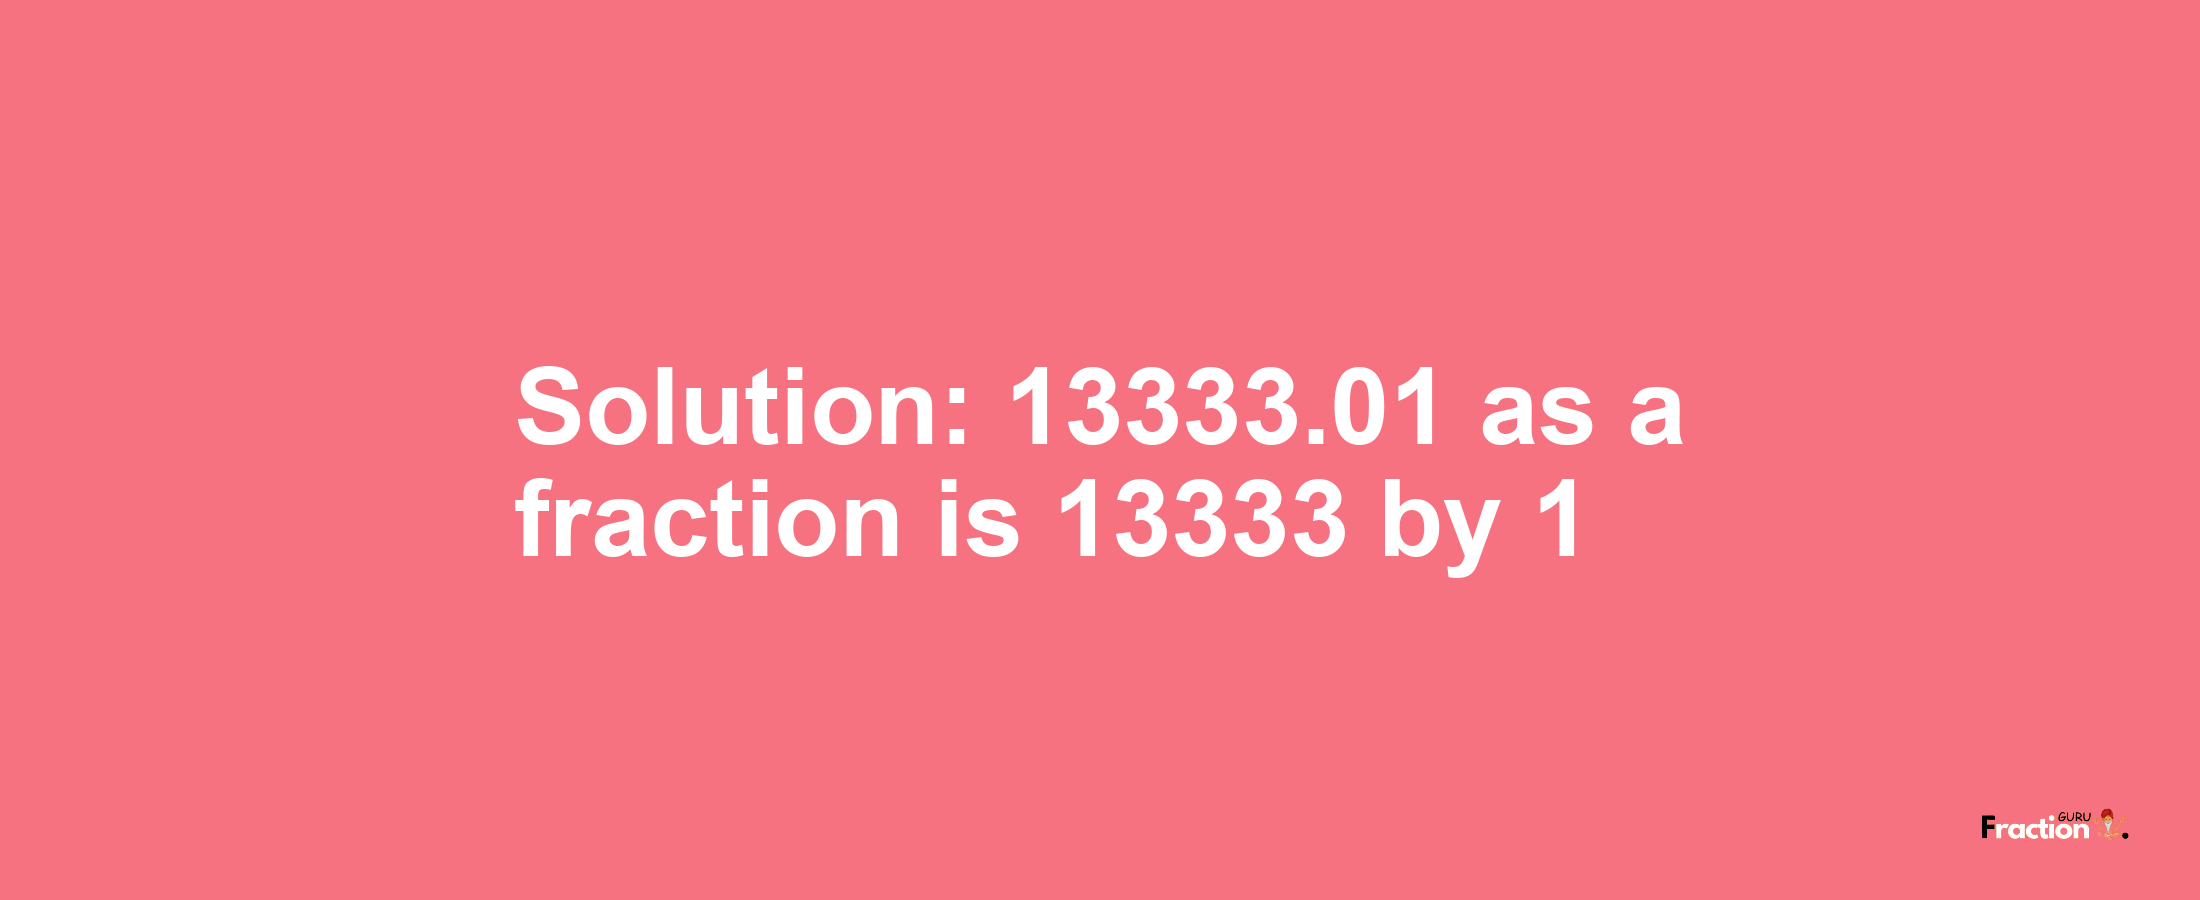 Solution:13333.01 as a fraction is 13333/1